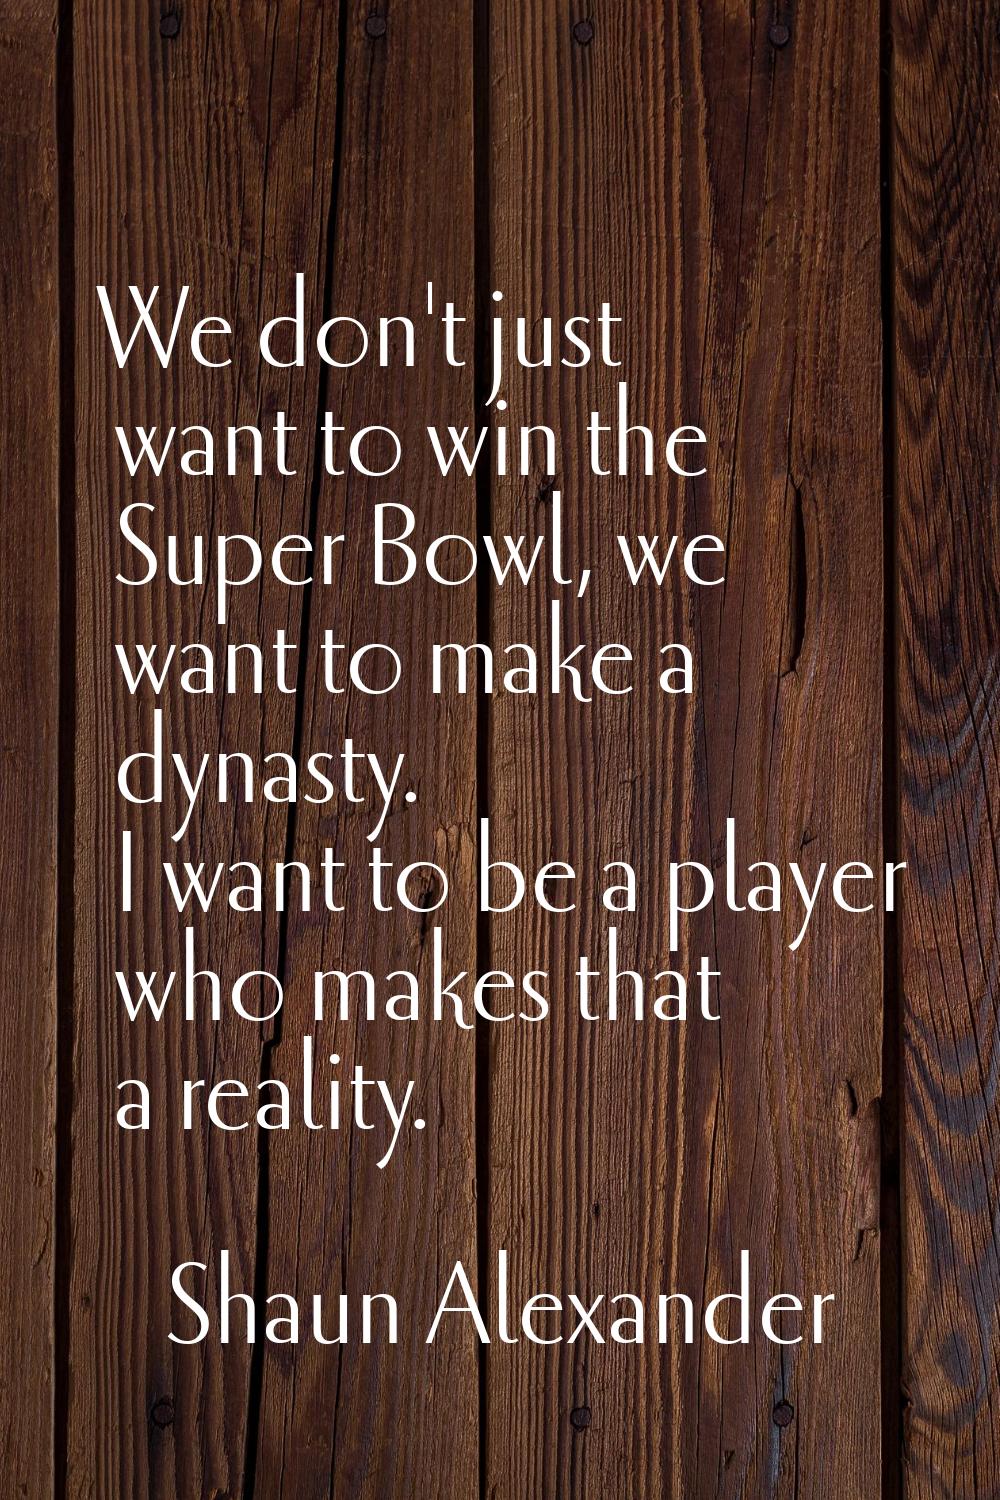 We don't just want to win the Super Bowl, we want to make a dynasty. I want to be a player who make